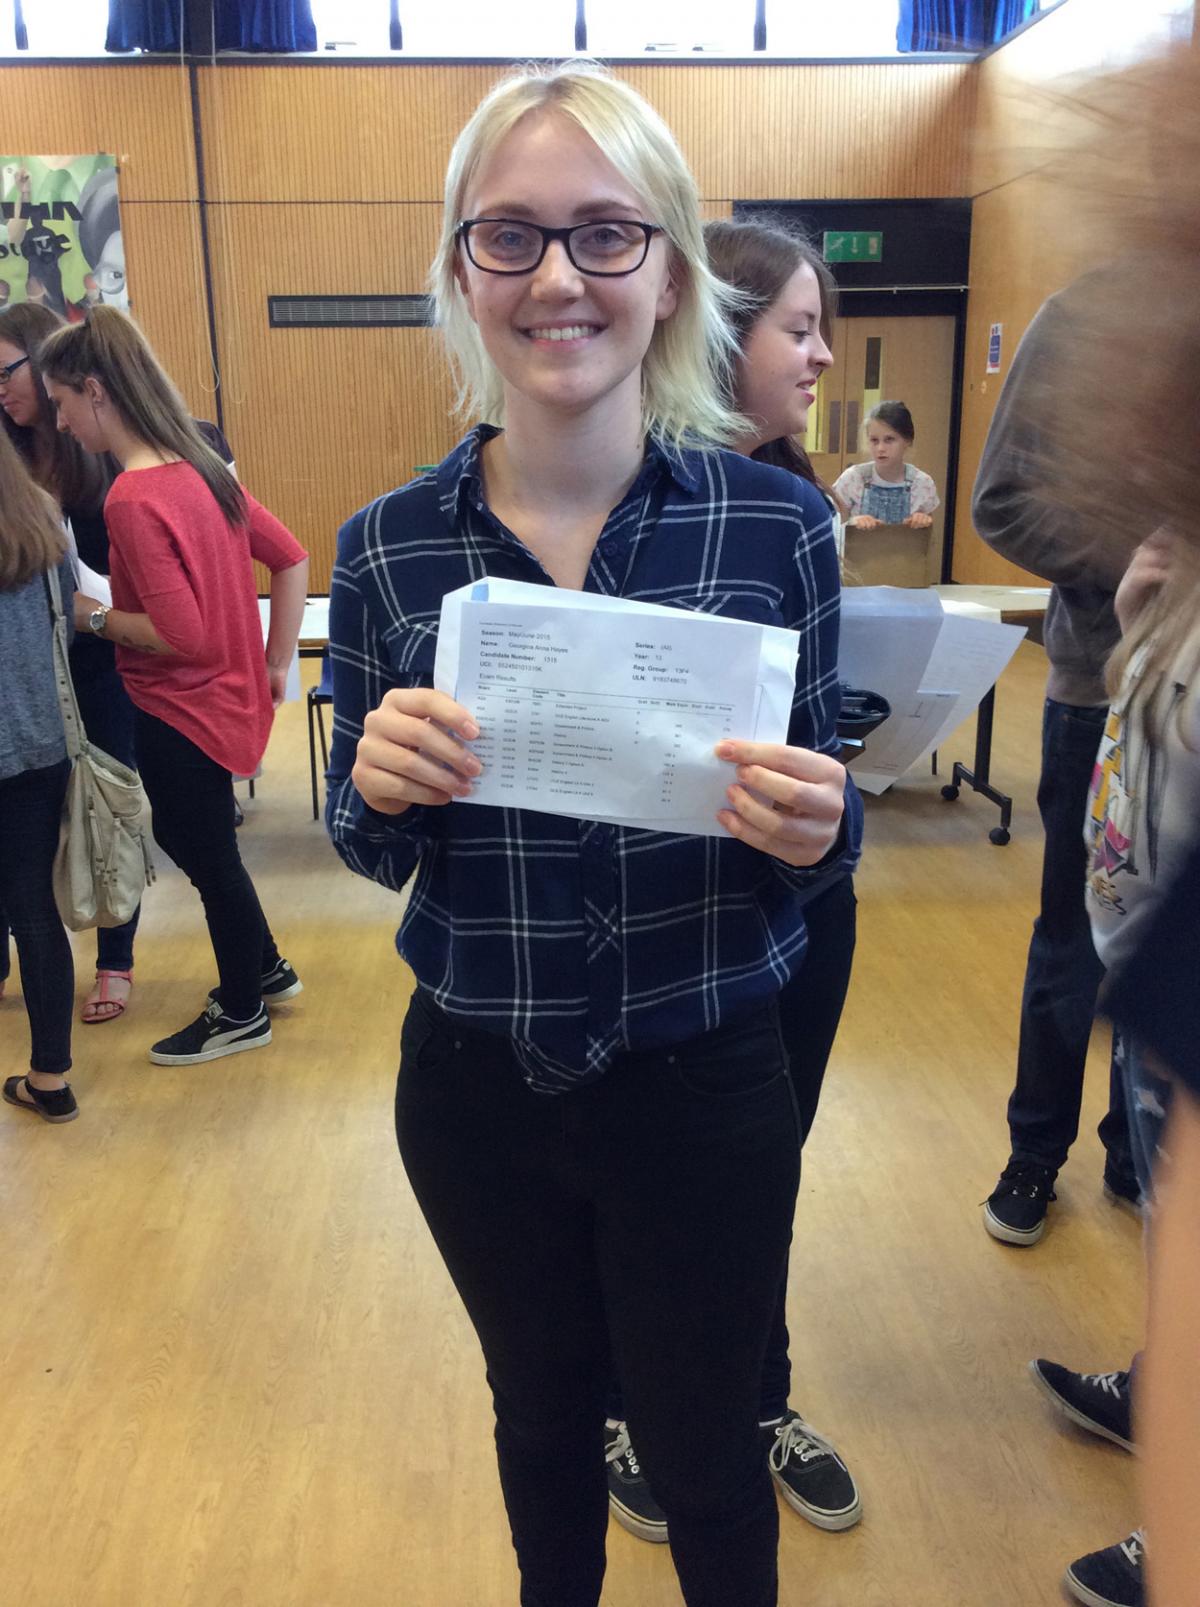 A Level results day 2015 at Corfe Hills School